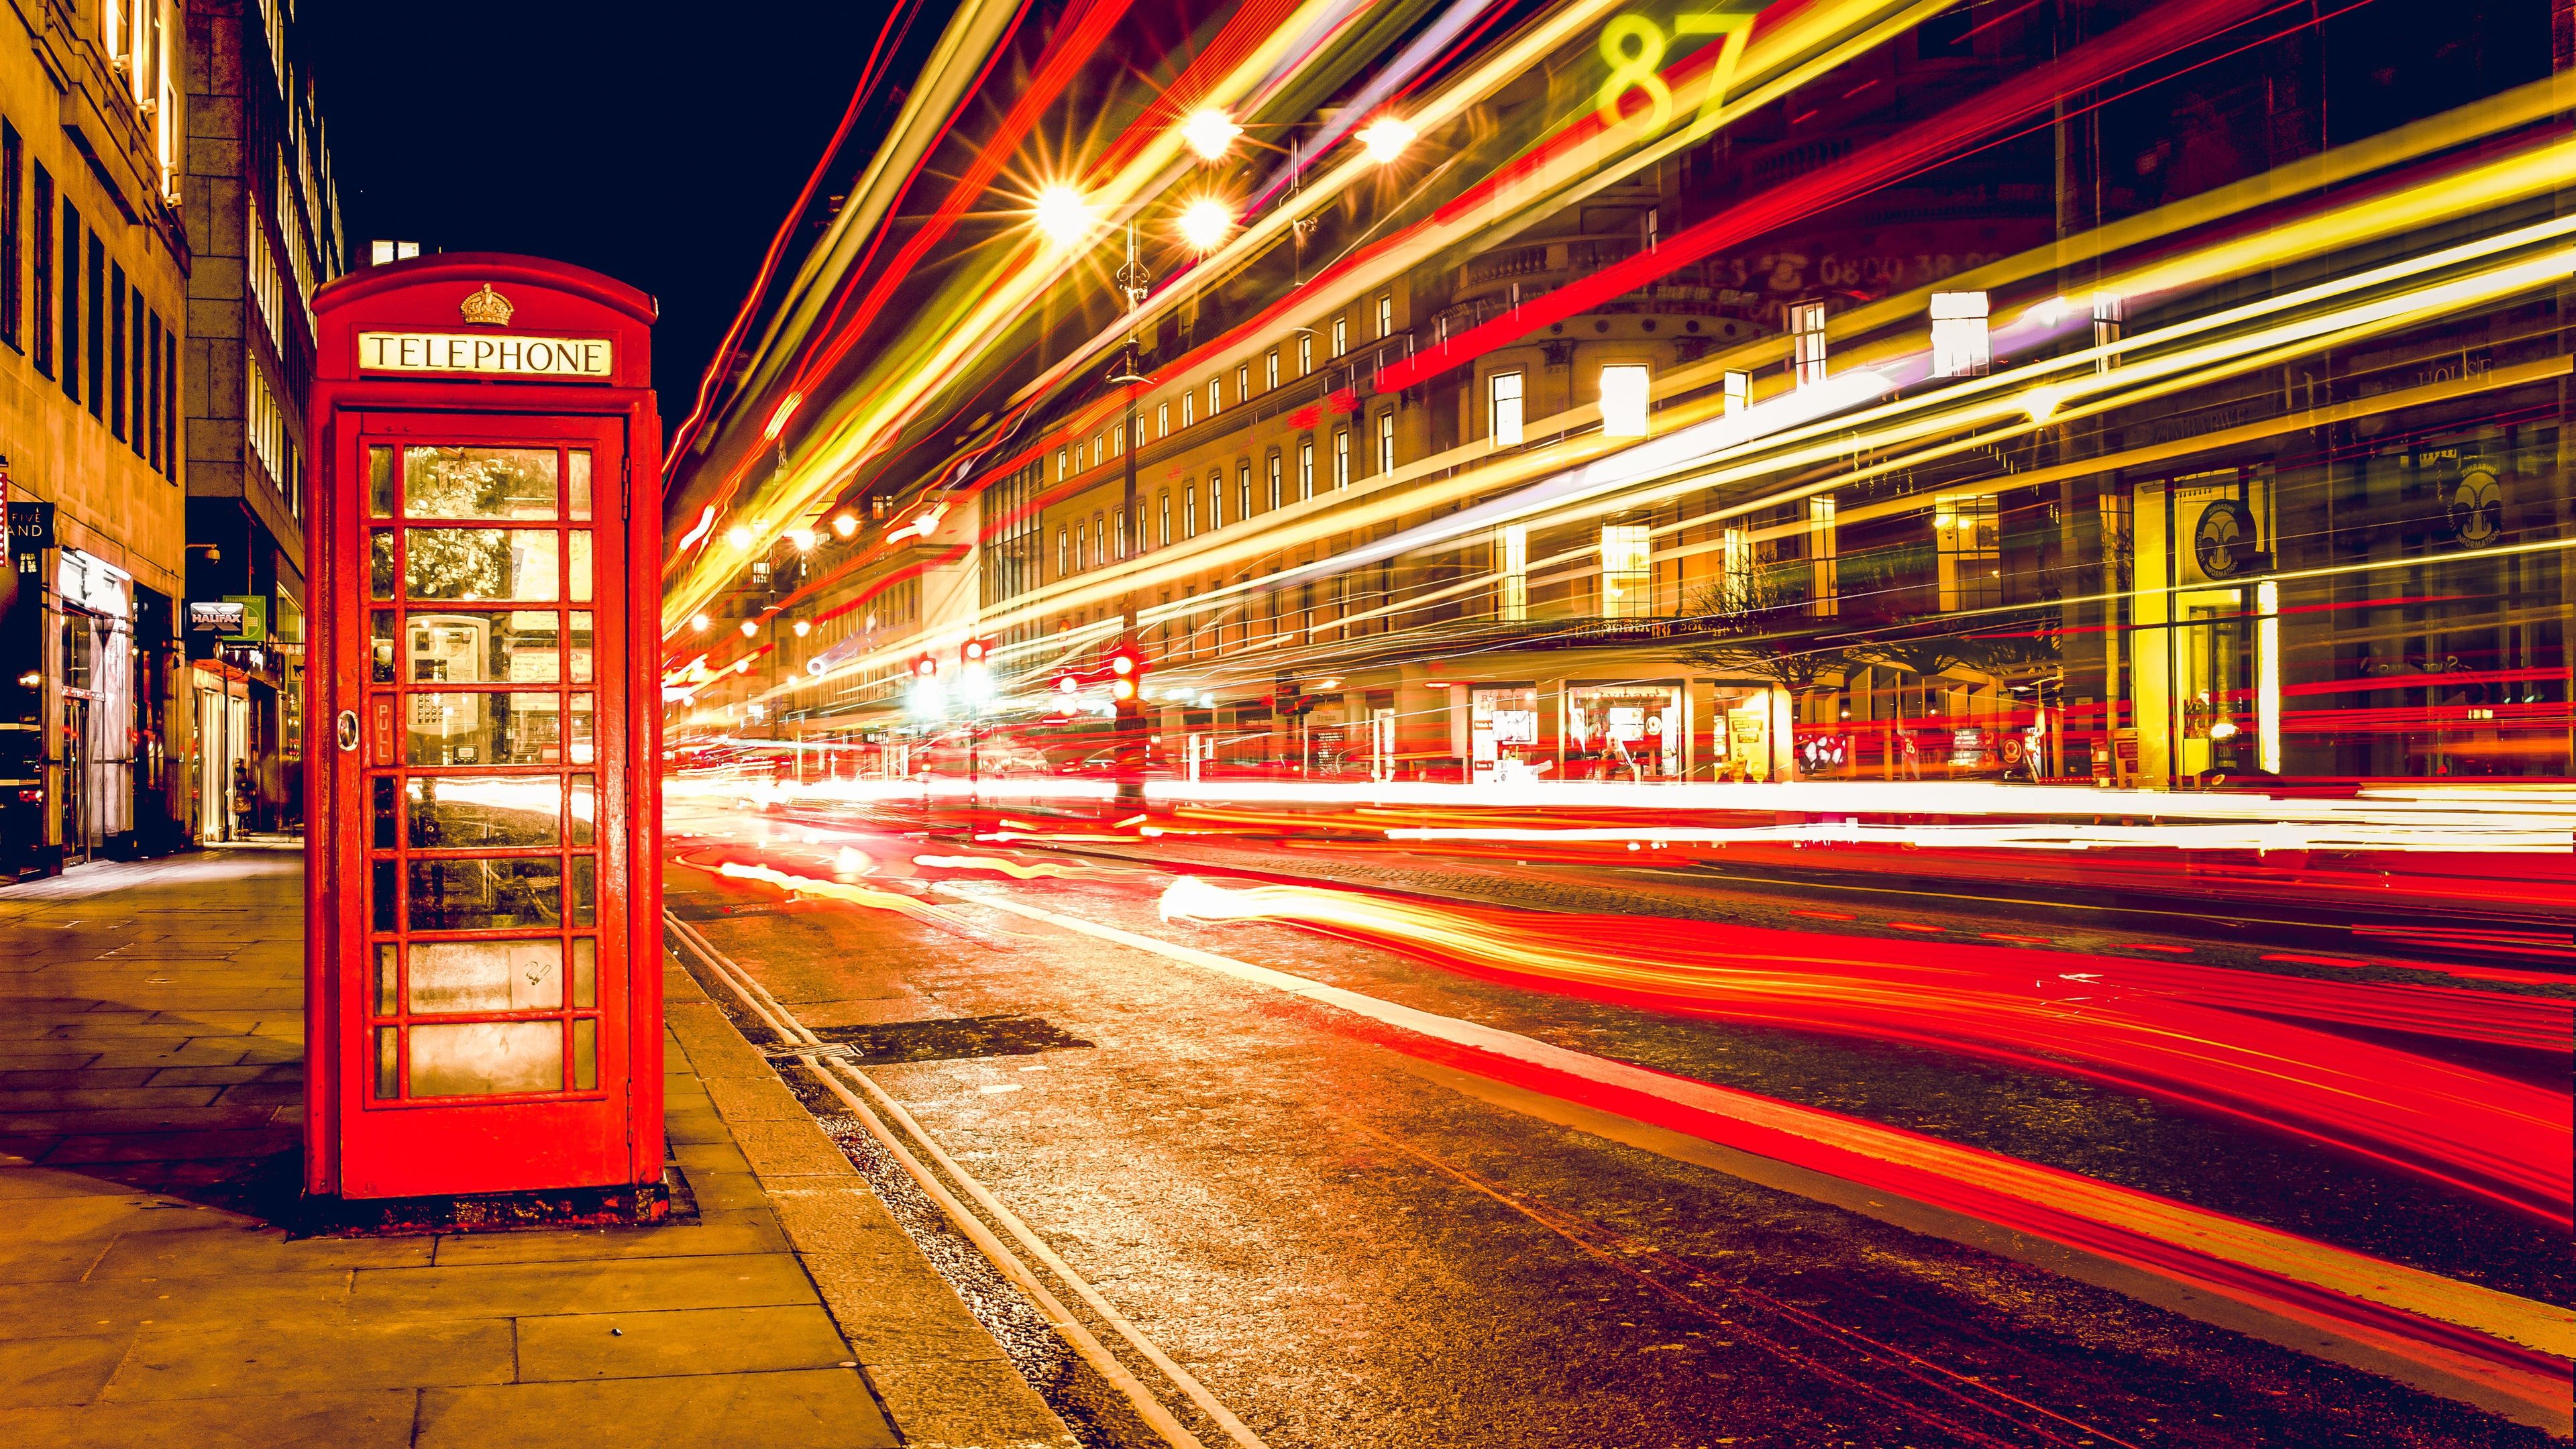 Wallpaper London, England, telephone booth, street, nights, lights 3840x2160 UHD 4K Picture, Image